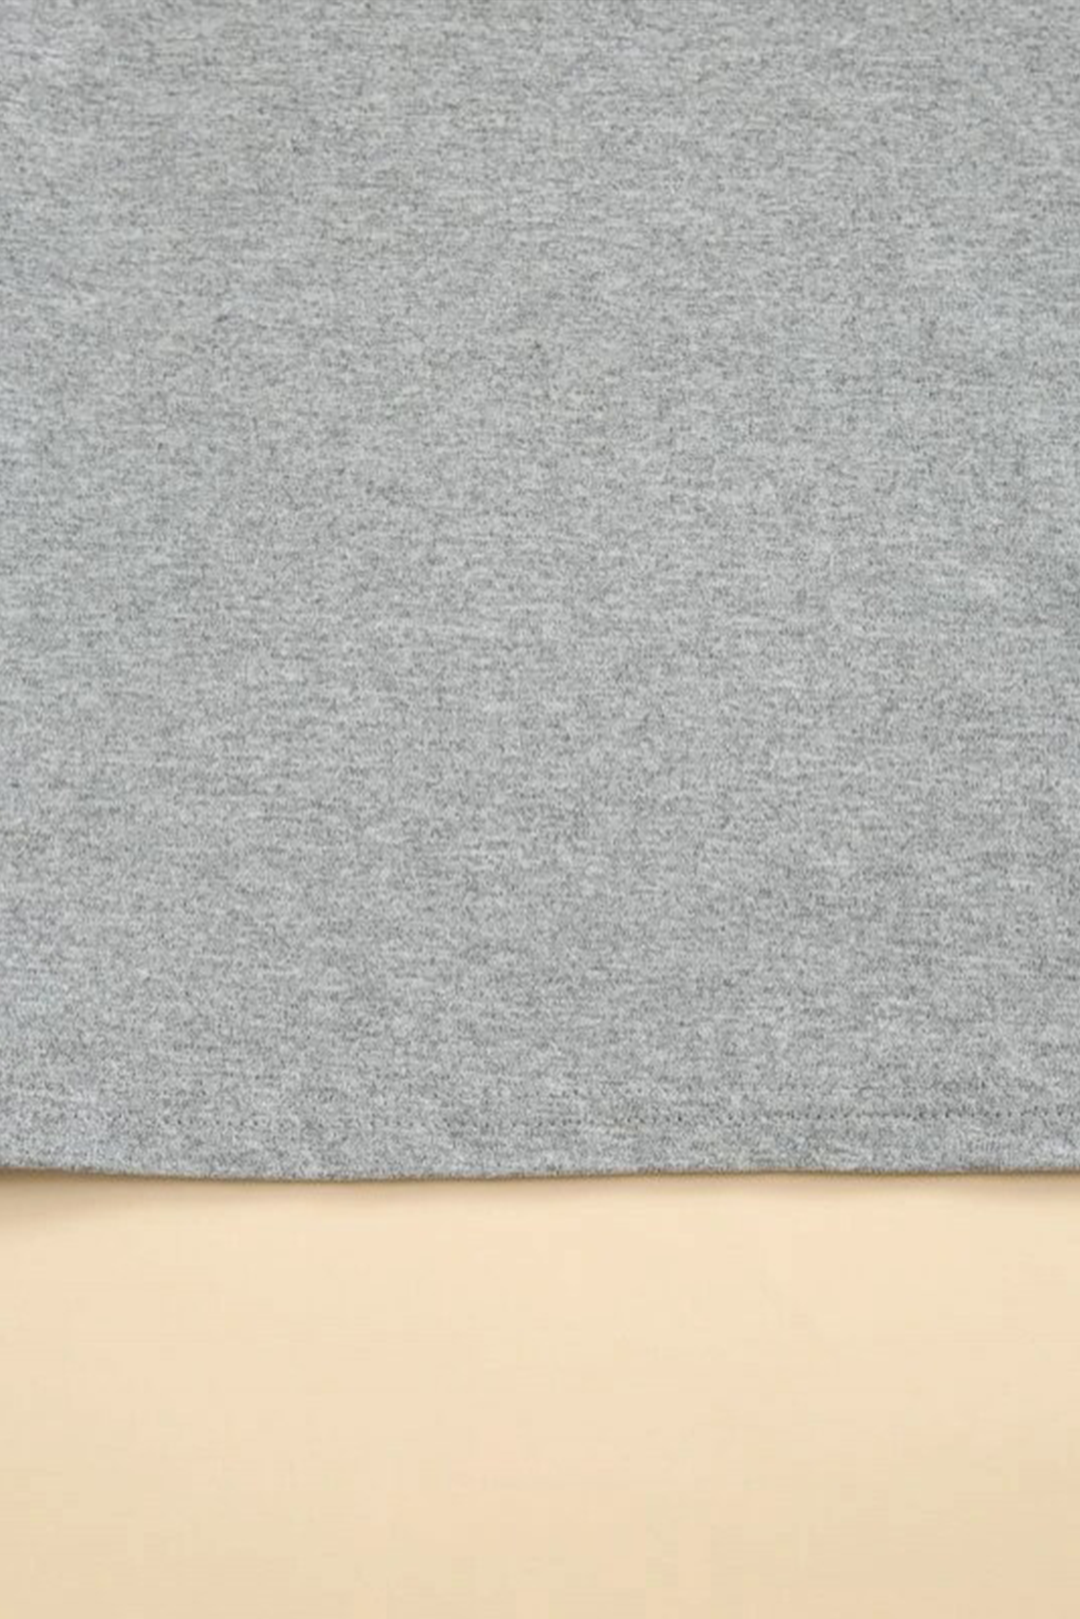 Grey Keep On Smiling Graphic Cropped Tee